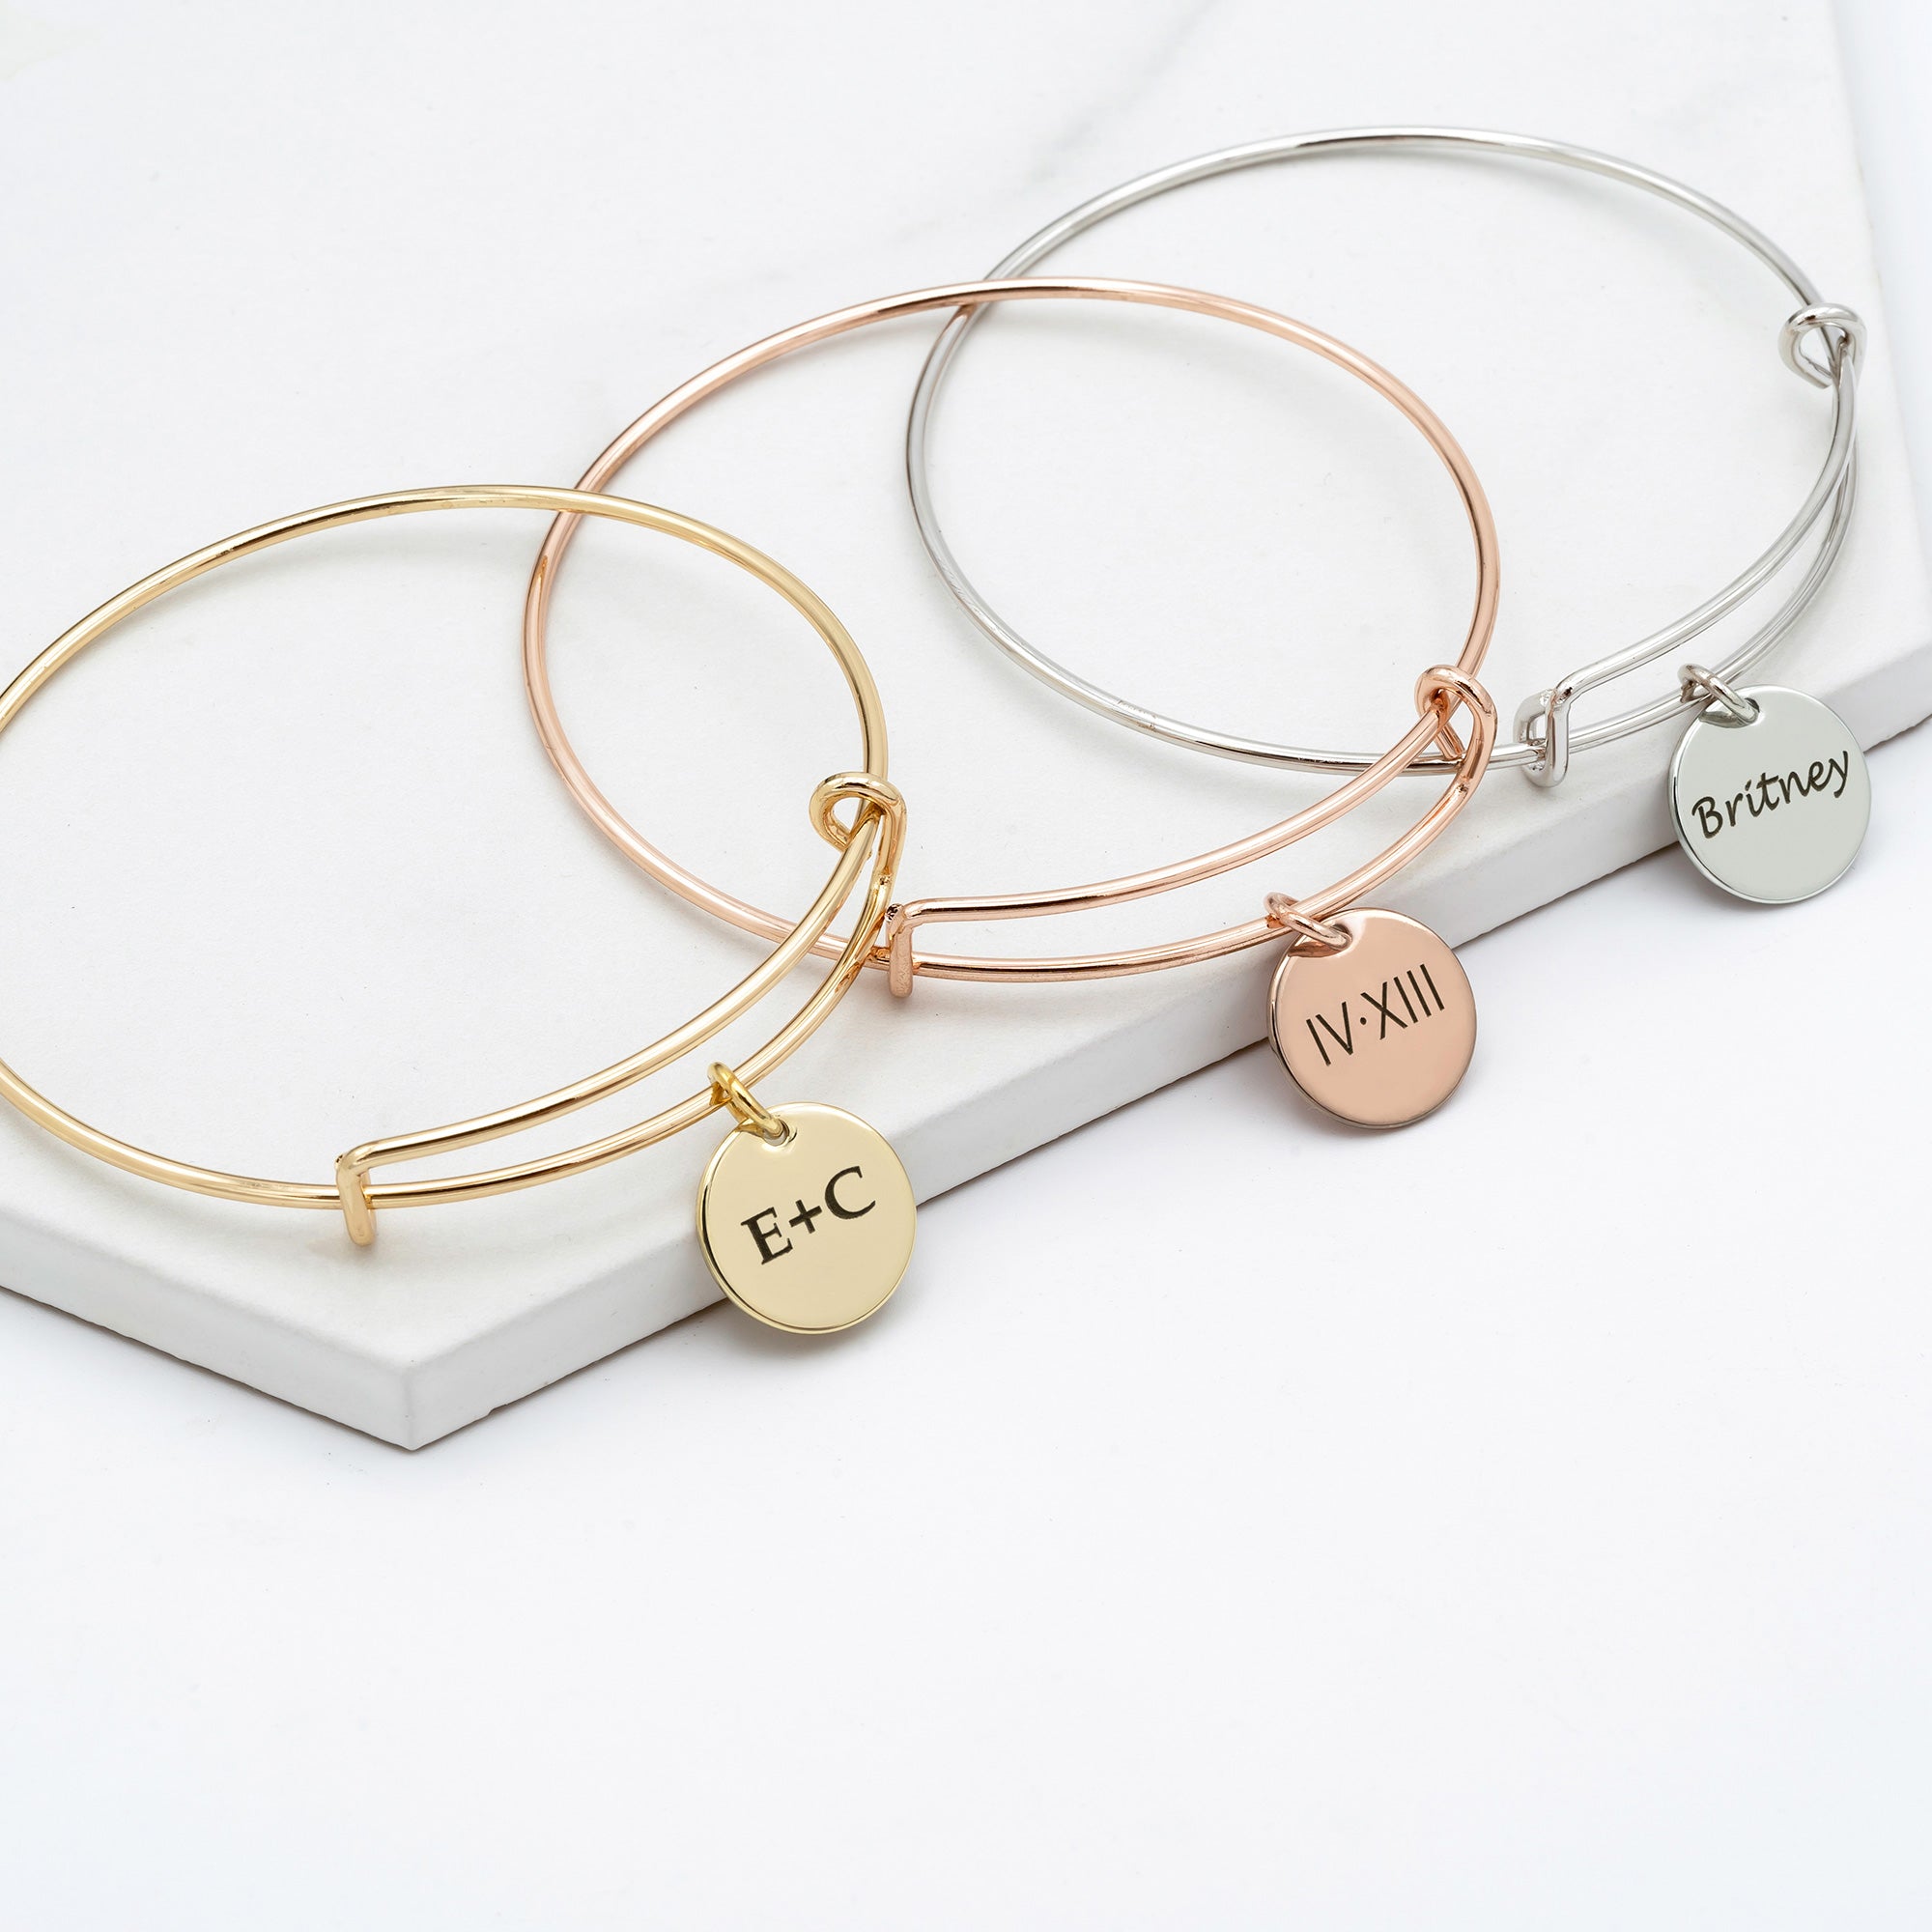 Personalized Photo Bangle With Heart Charm – Wear Felicity